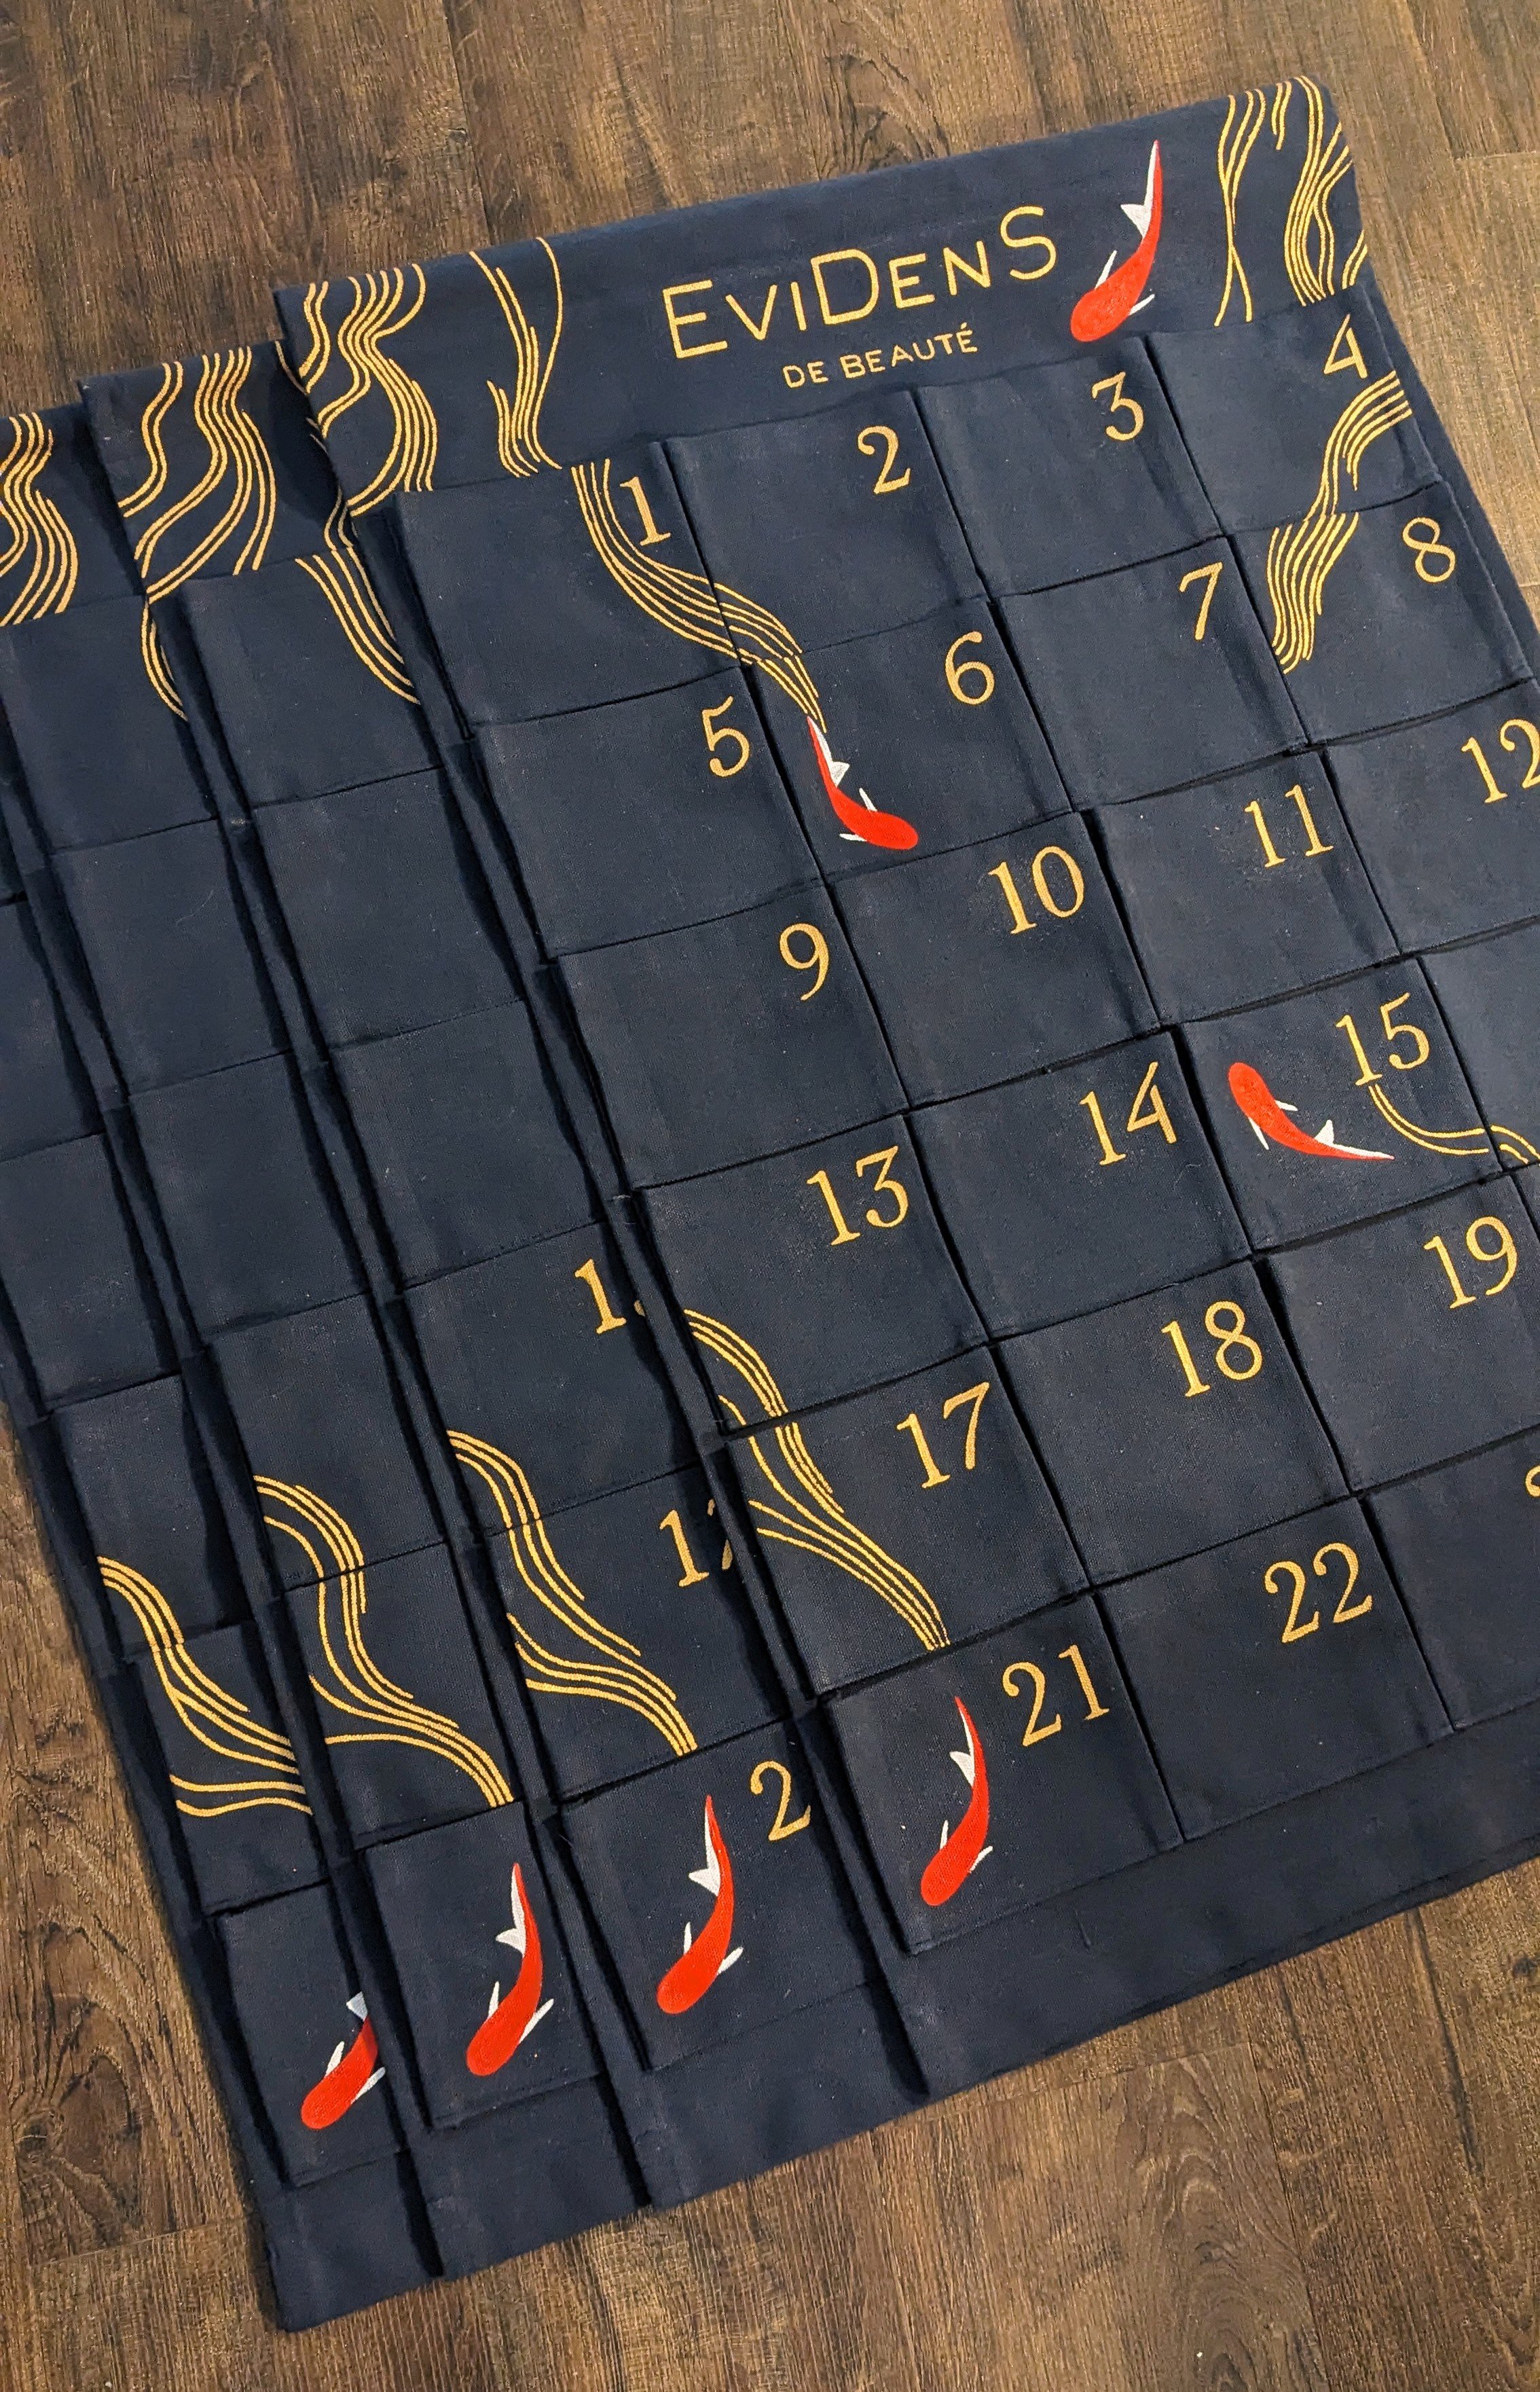 Hand painted advent calendars for EviDenS